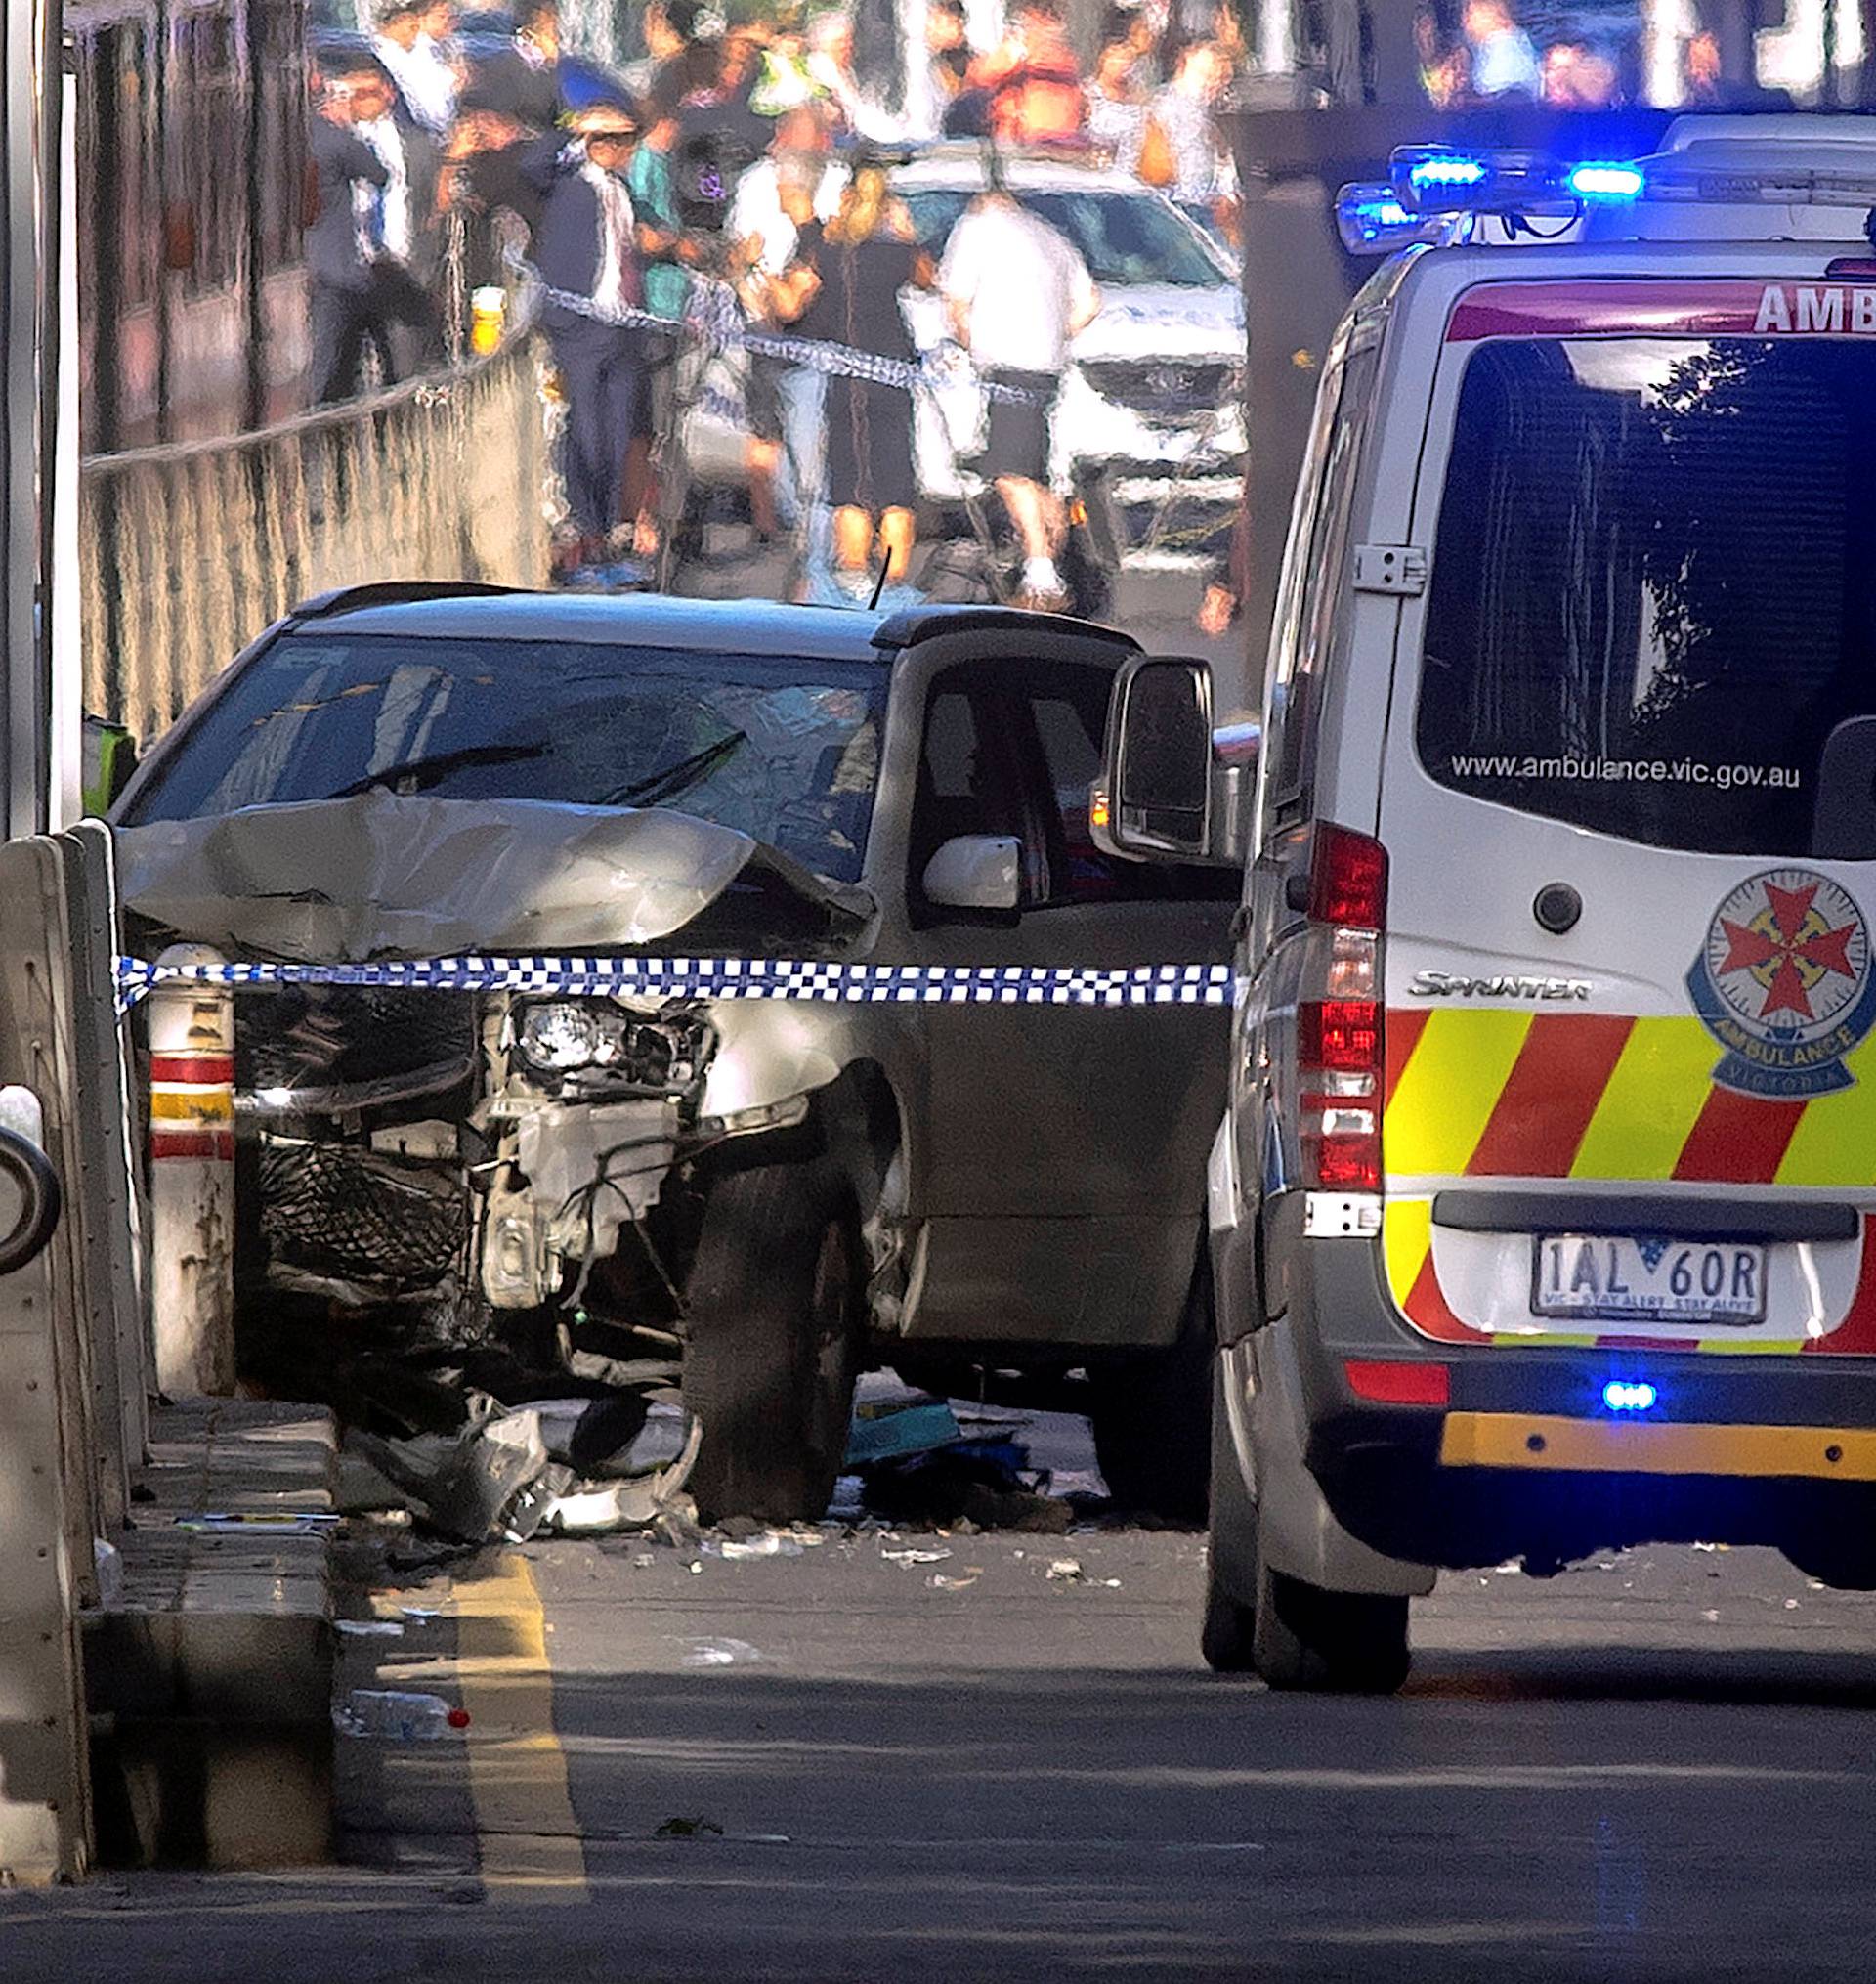 Australian police stand near a crashed vehicle after they arrested the driver of a vehicle that had ploughed into pedestrians at a crowded intersection near the Flinders Street train station in central Melbourne